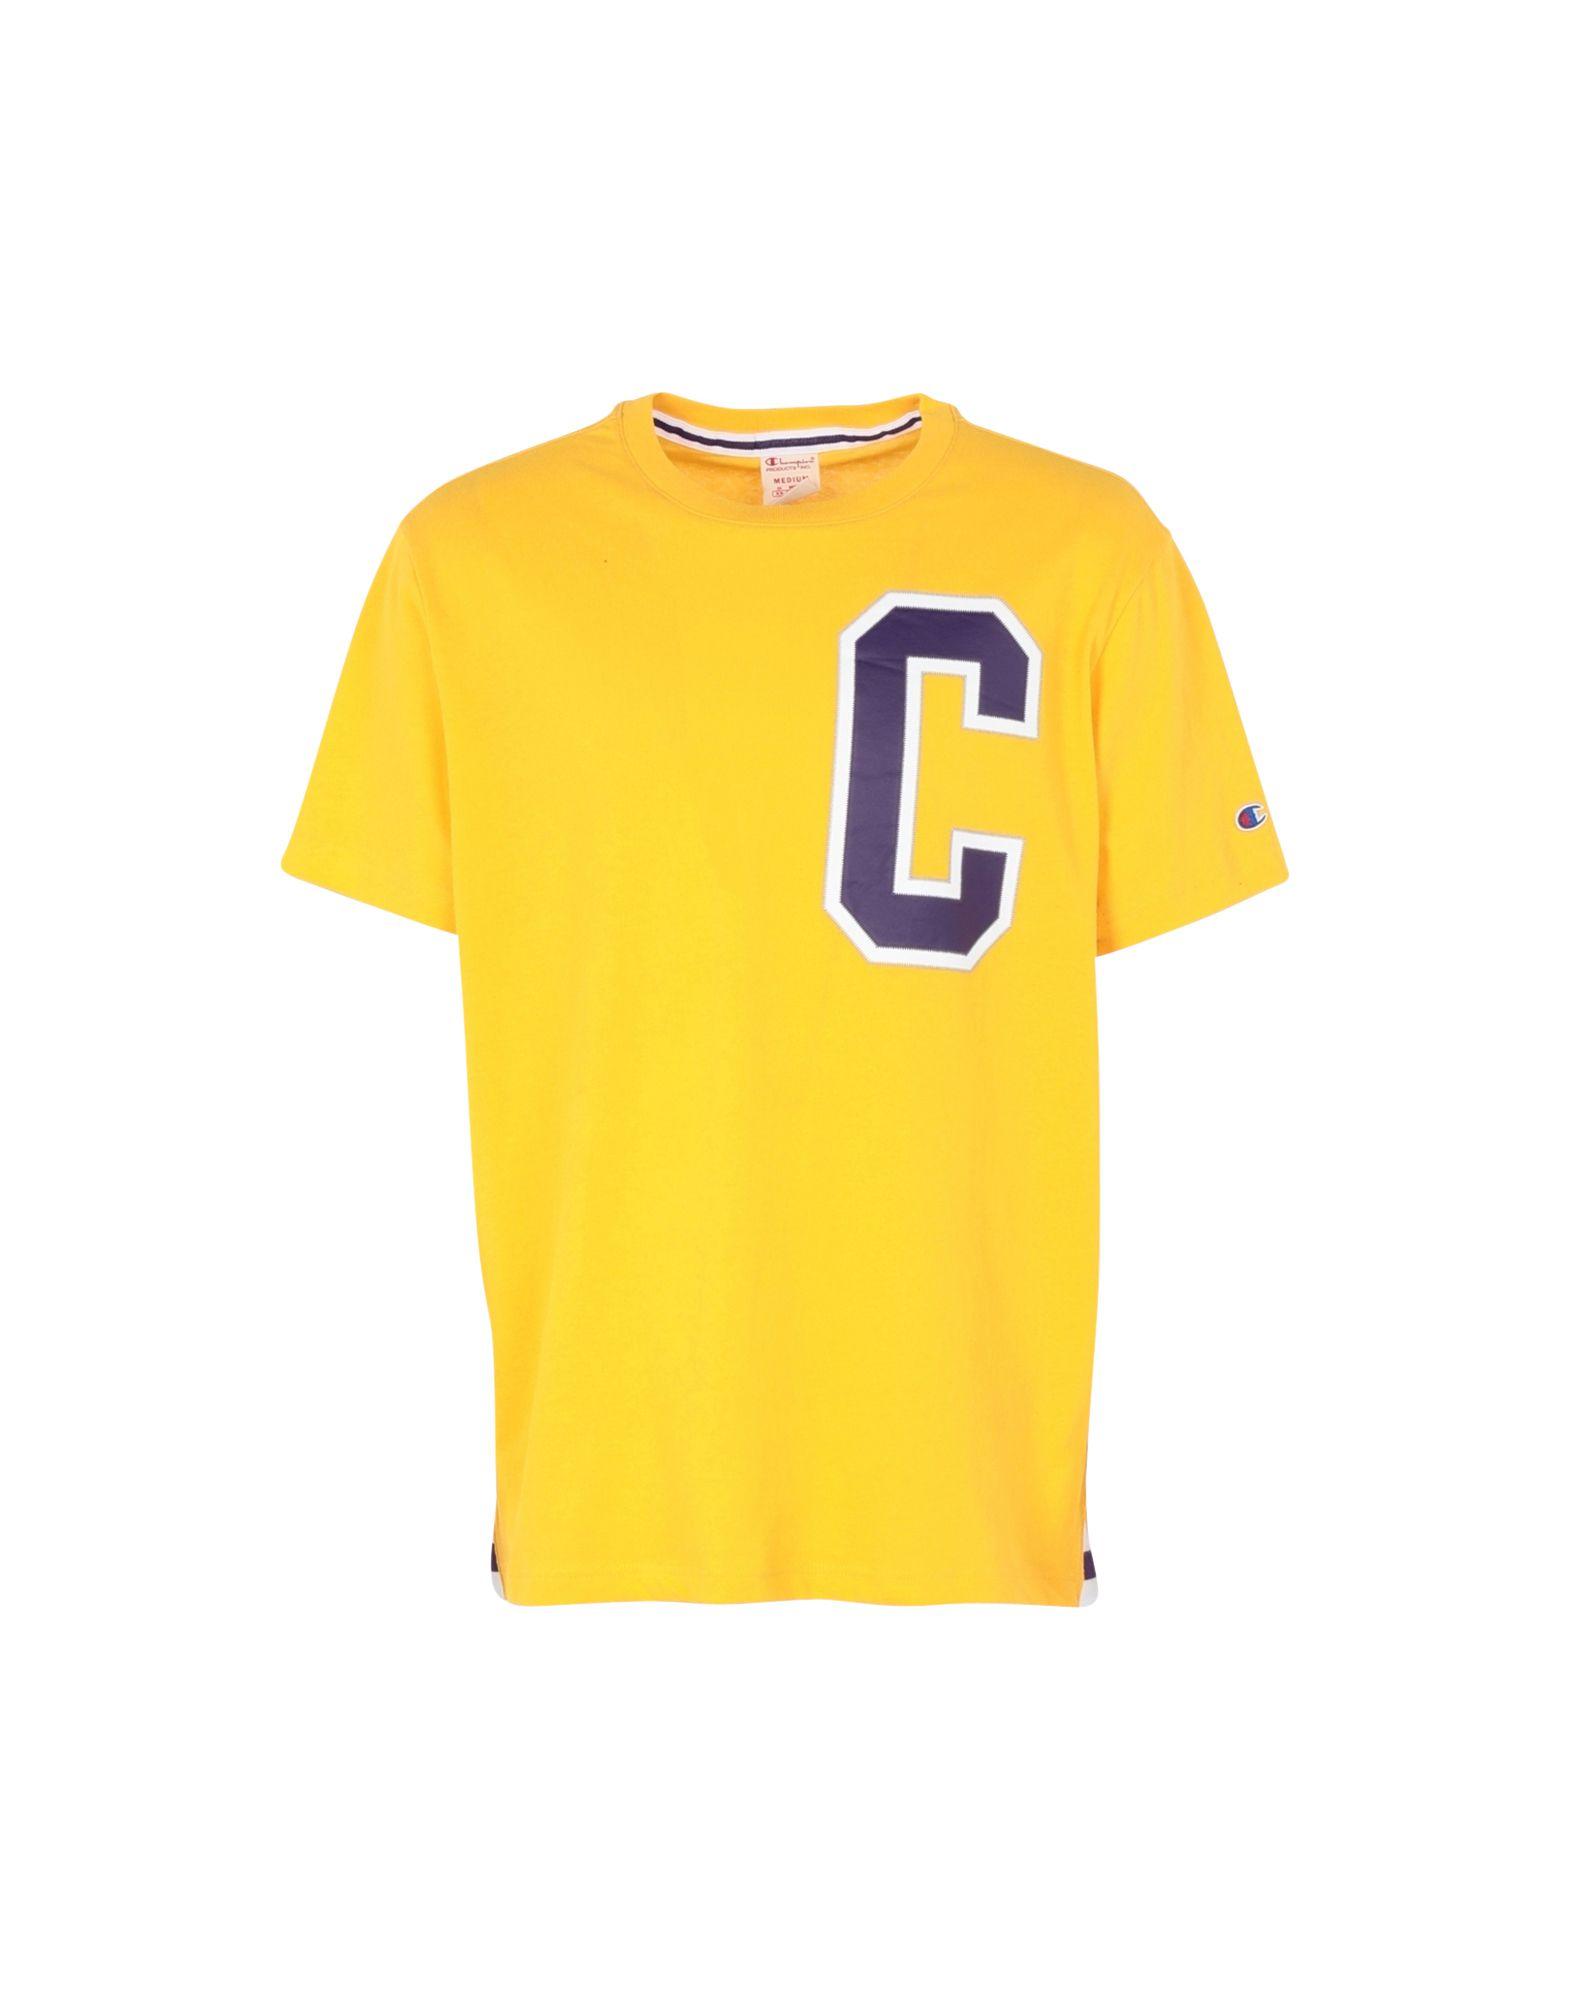 Champion Cotton T-shirt in Yellow for Men - Lyst